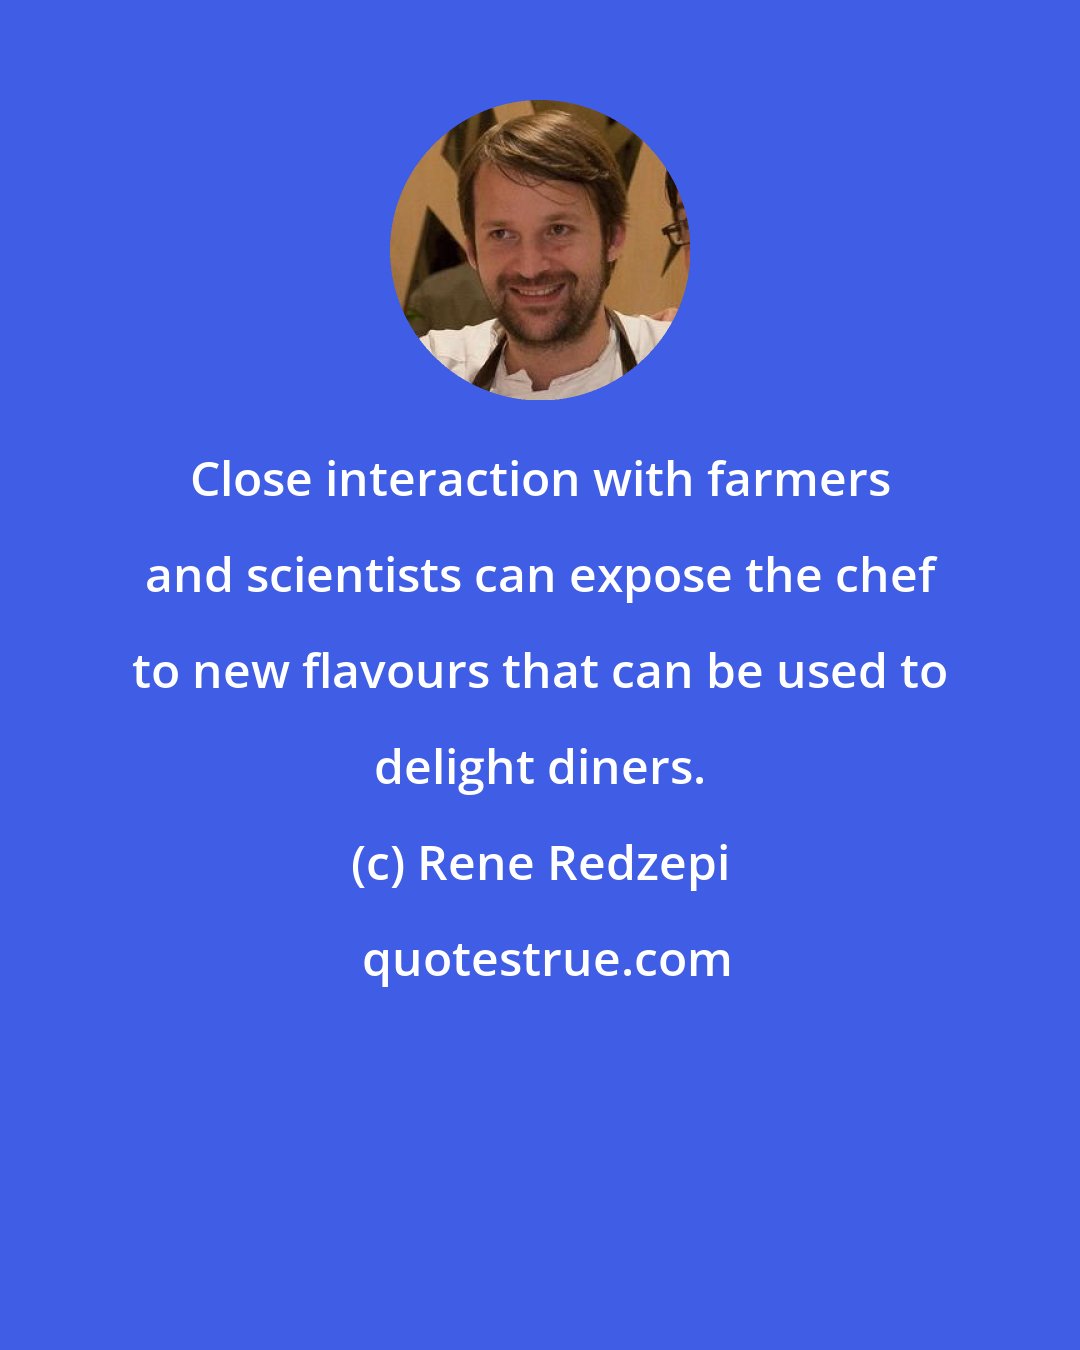 Rene Redzepi: Close interaction with farmers and scientists can expose the chef to new flavours that can be used to delight diners.